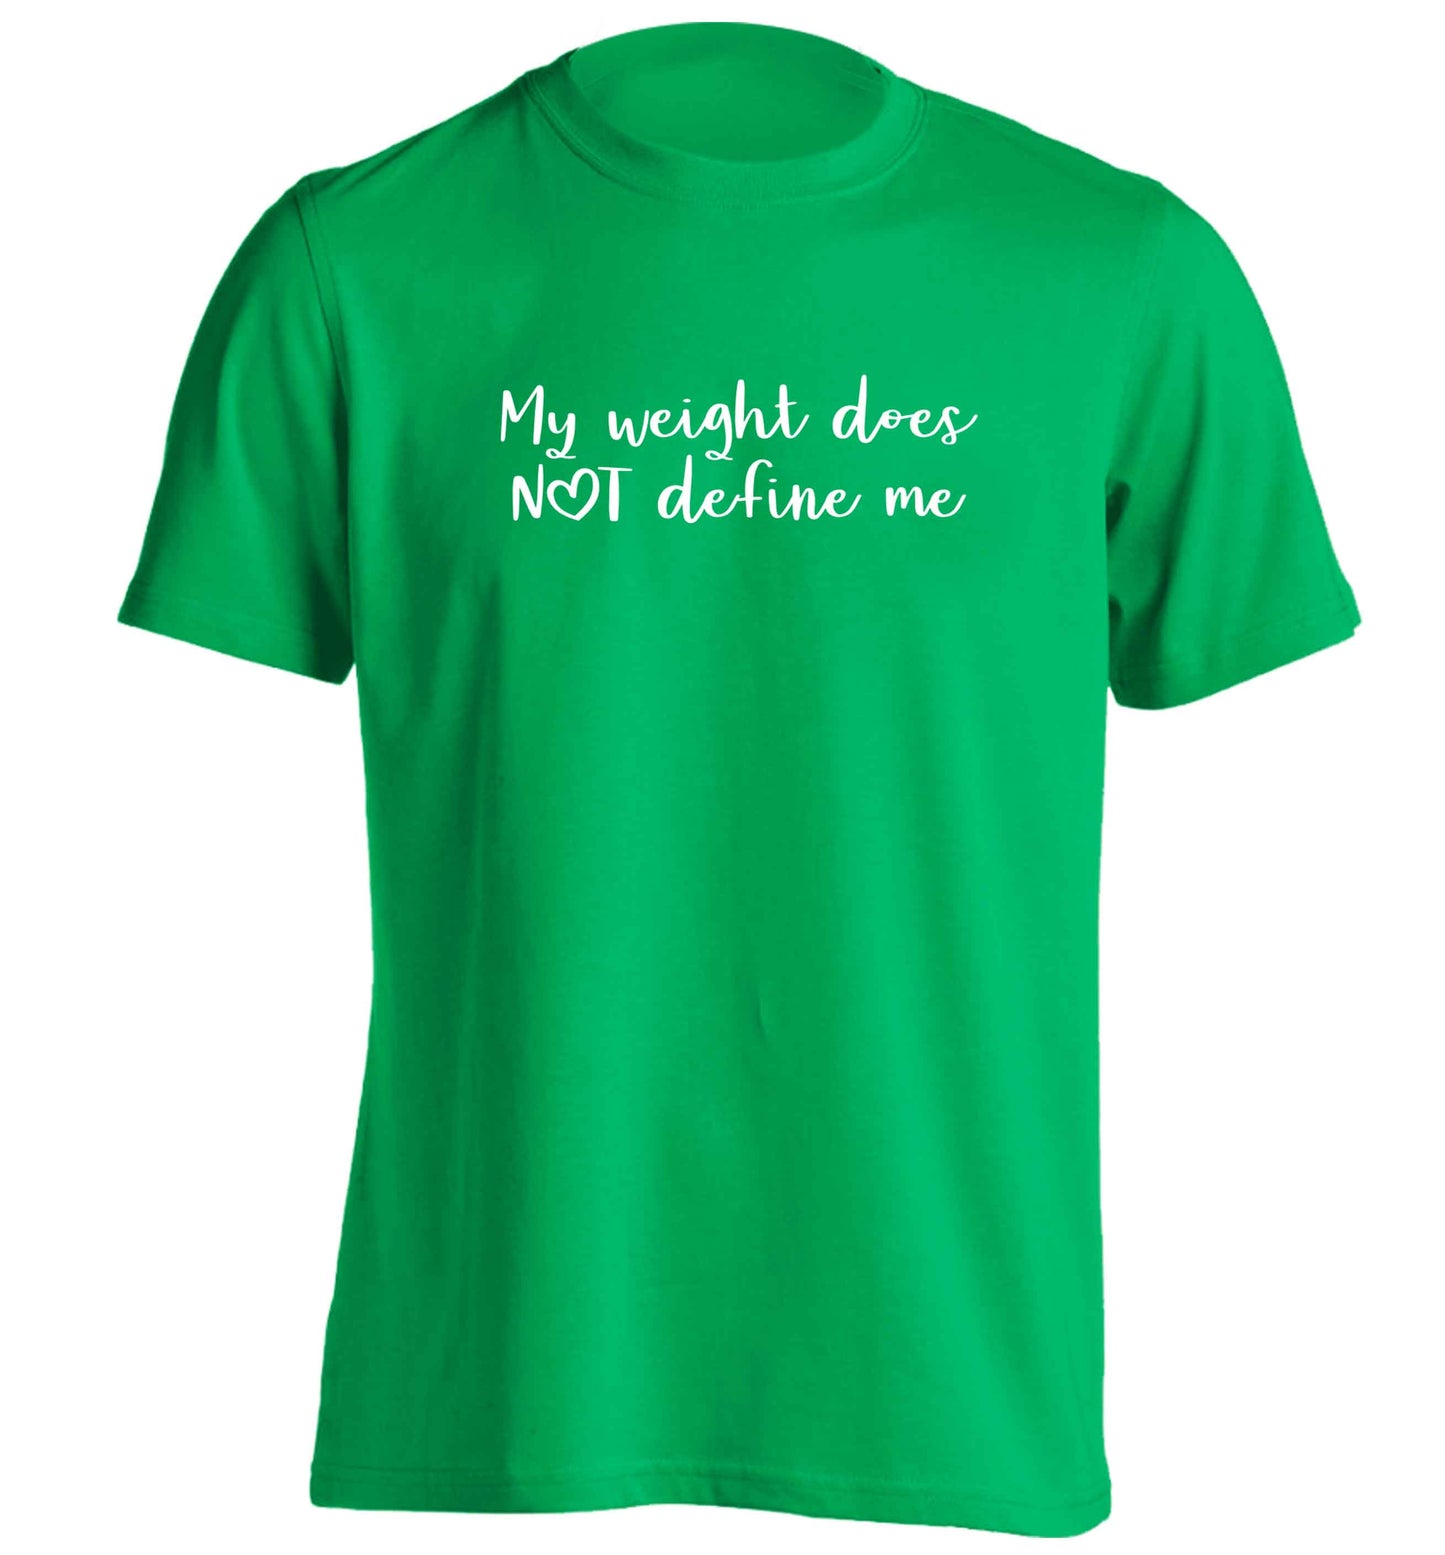 My weight does not define me adults unisex green Tshirt 2XL